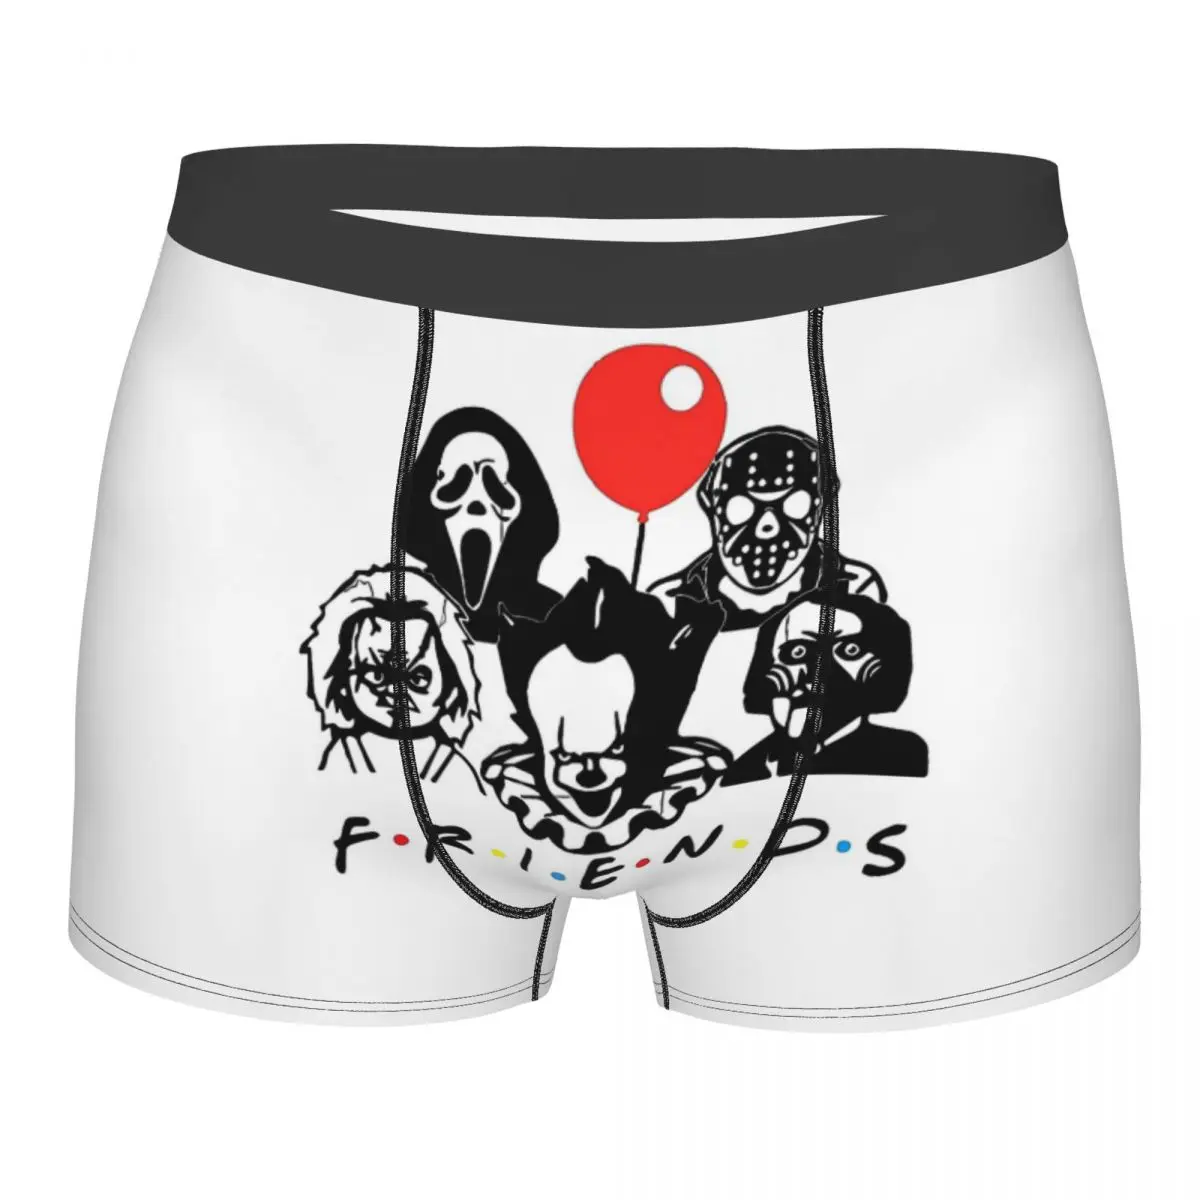 

Halloween Horror Friends Men Boxer Briefs Underpants Highly Breathable High Quality Sexy Shorts Gift Idea